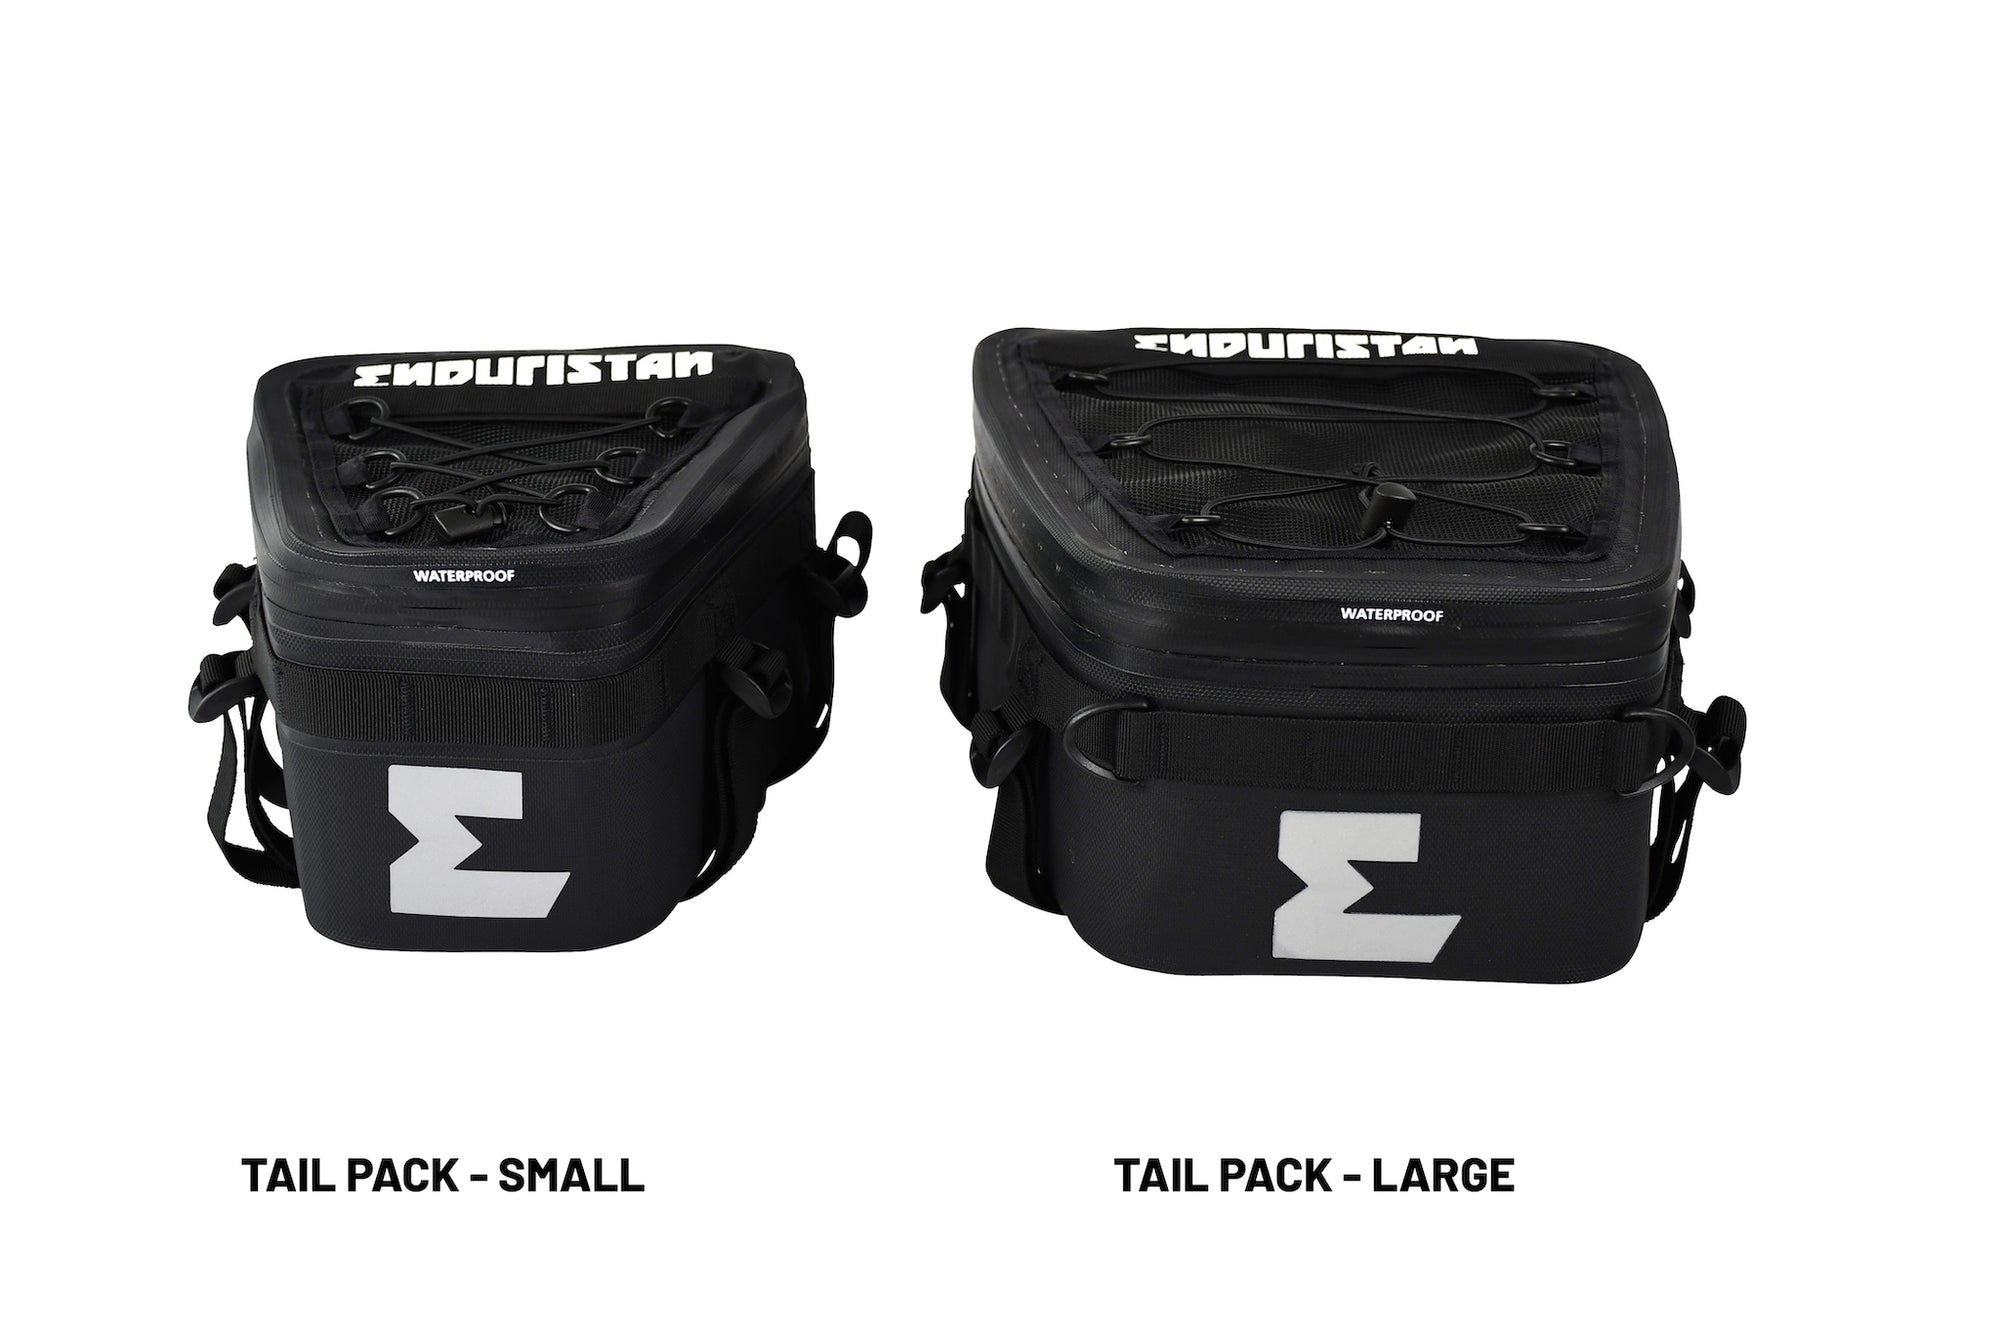 Tail Pack - Large